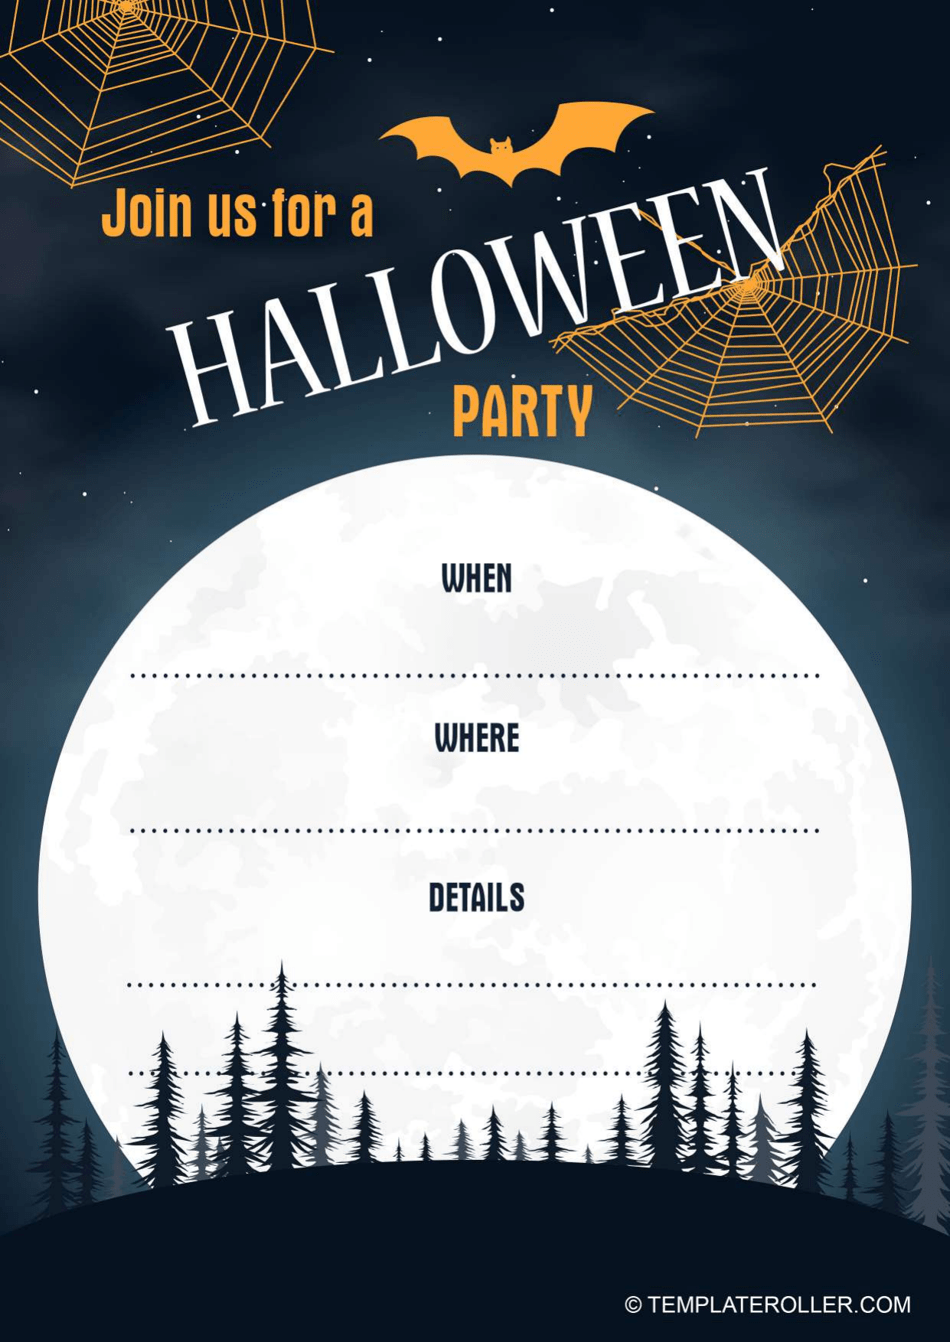 Halloween Party Invitation Template Showing a Creepy Big Moon